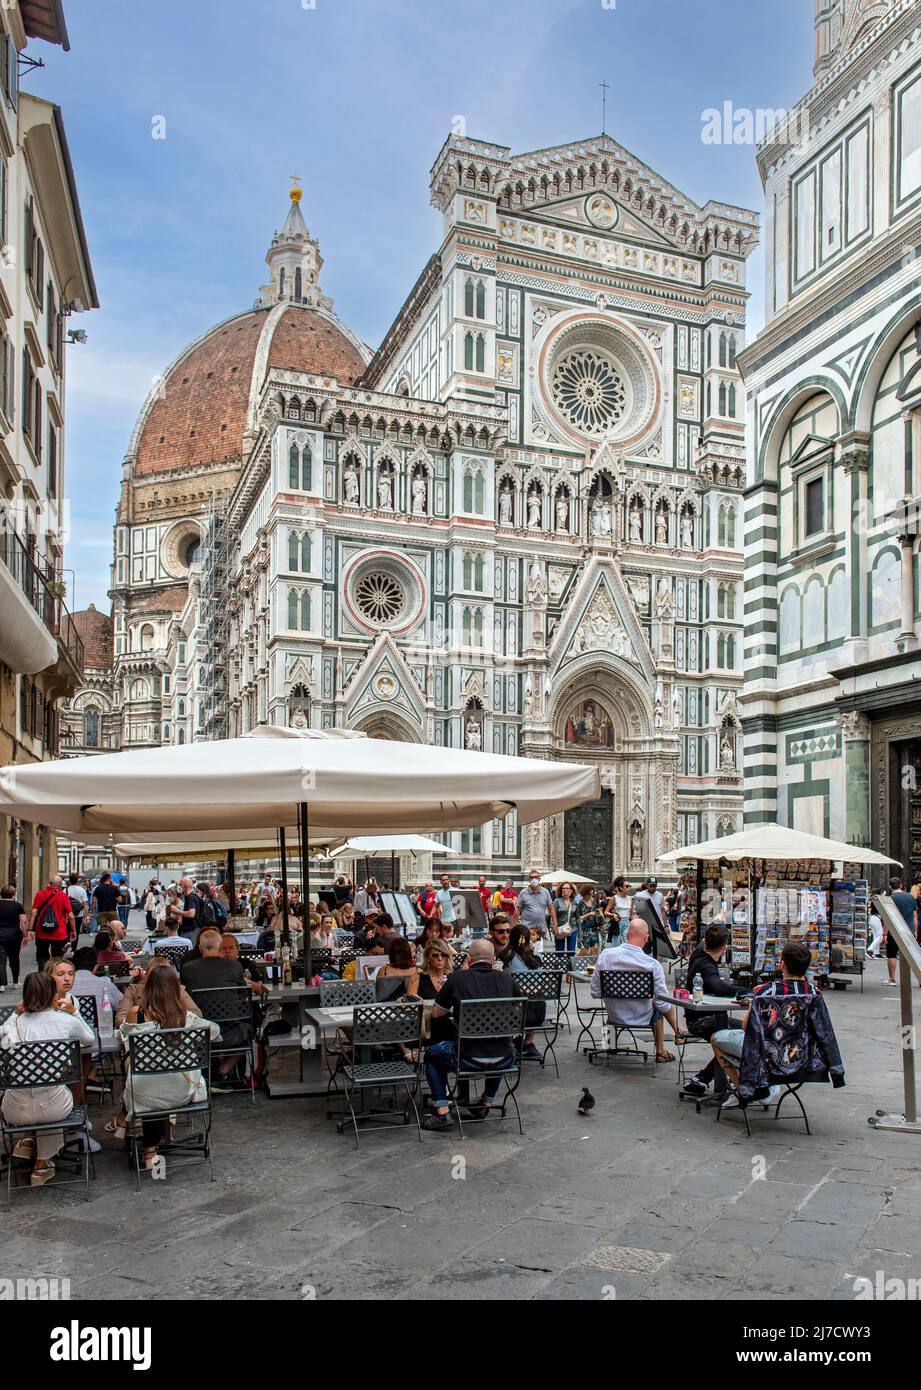 Outdoor restaurant in front of Florence Cathedral, Piazza del Duomo, Firenze, Italy Stock Photo